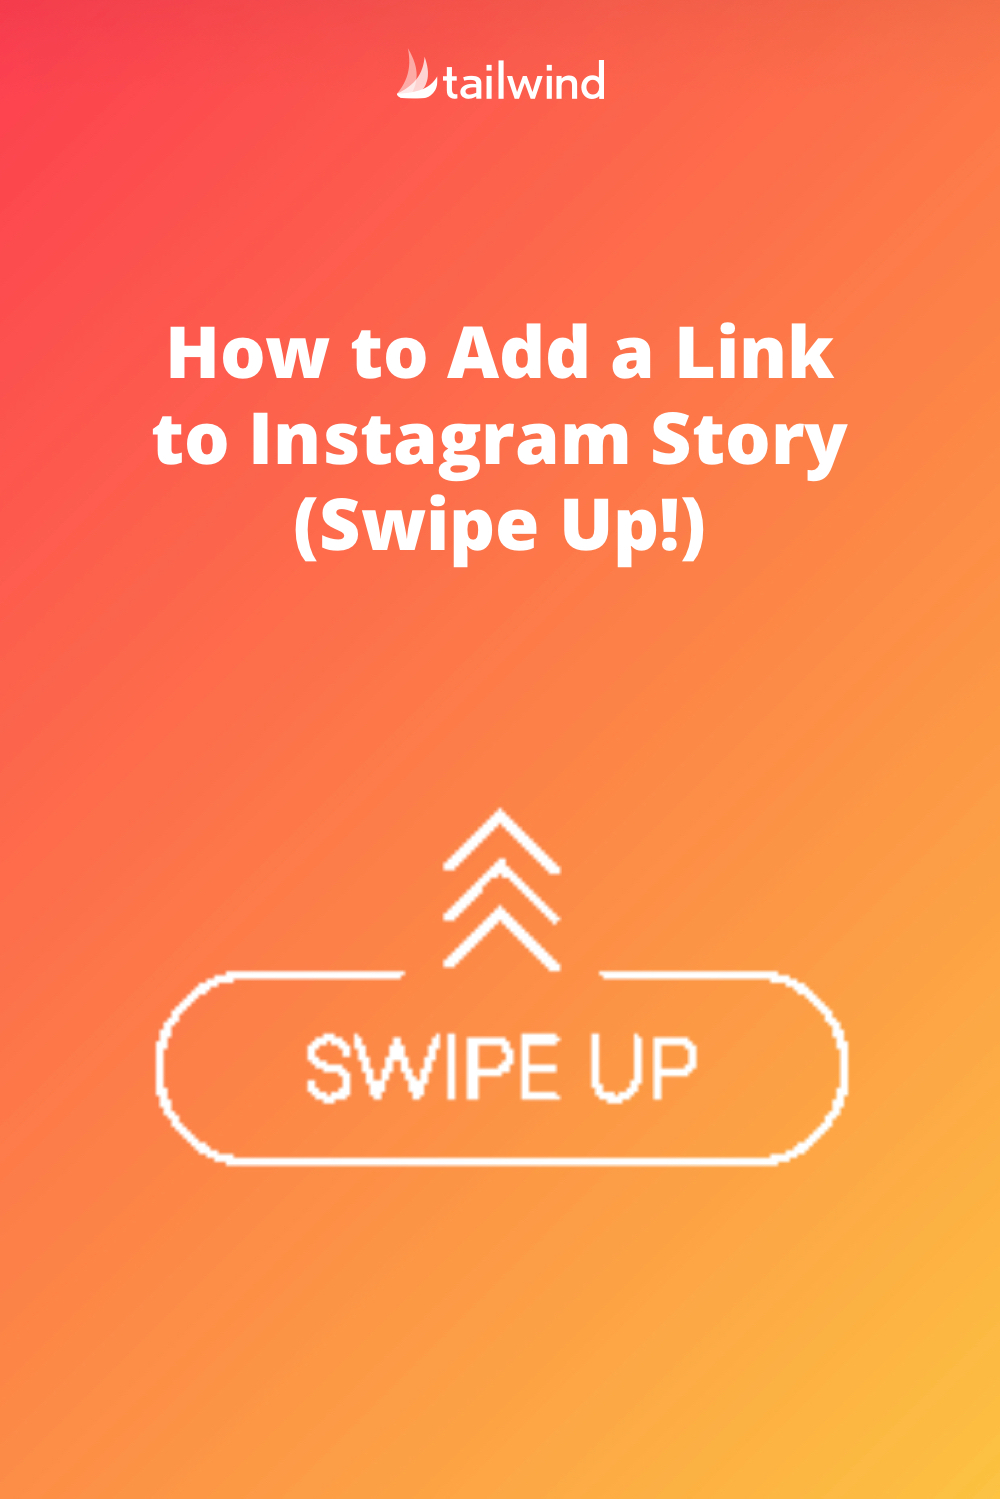 How To Add A Link To Your Instagram Story Swipe Up Tailwind App